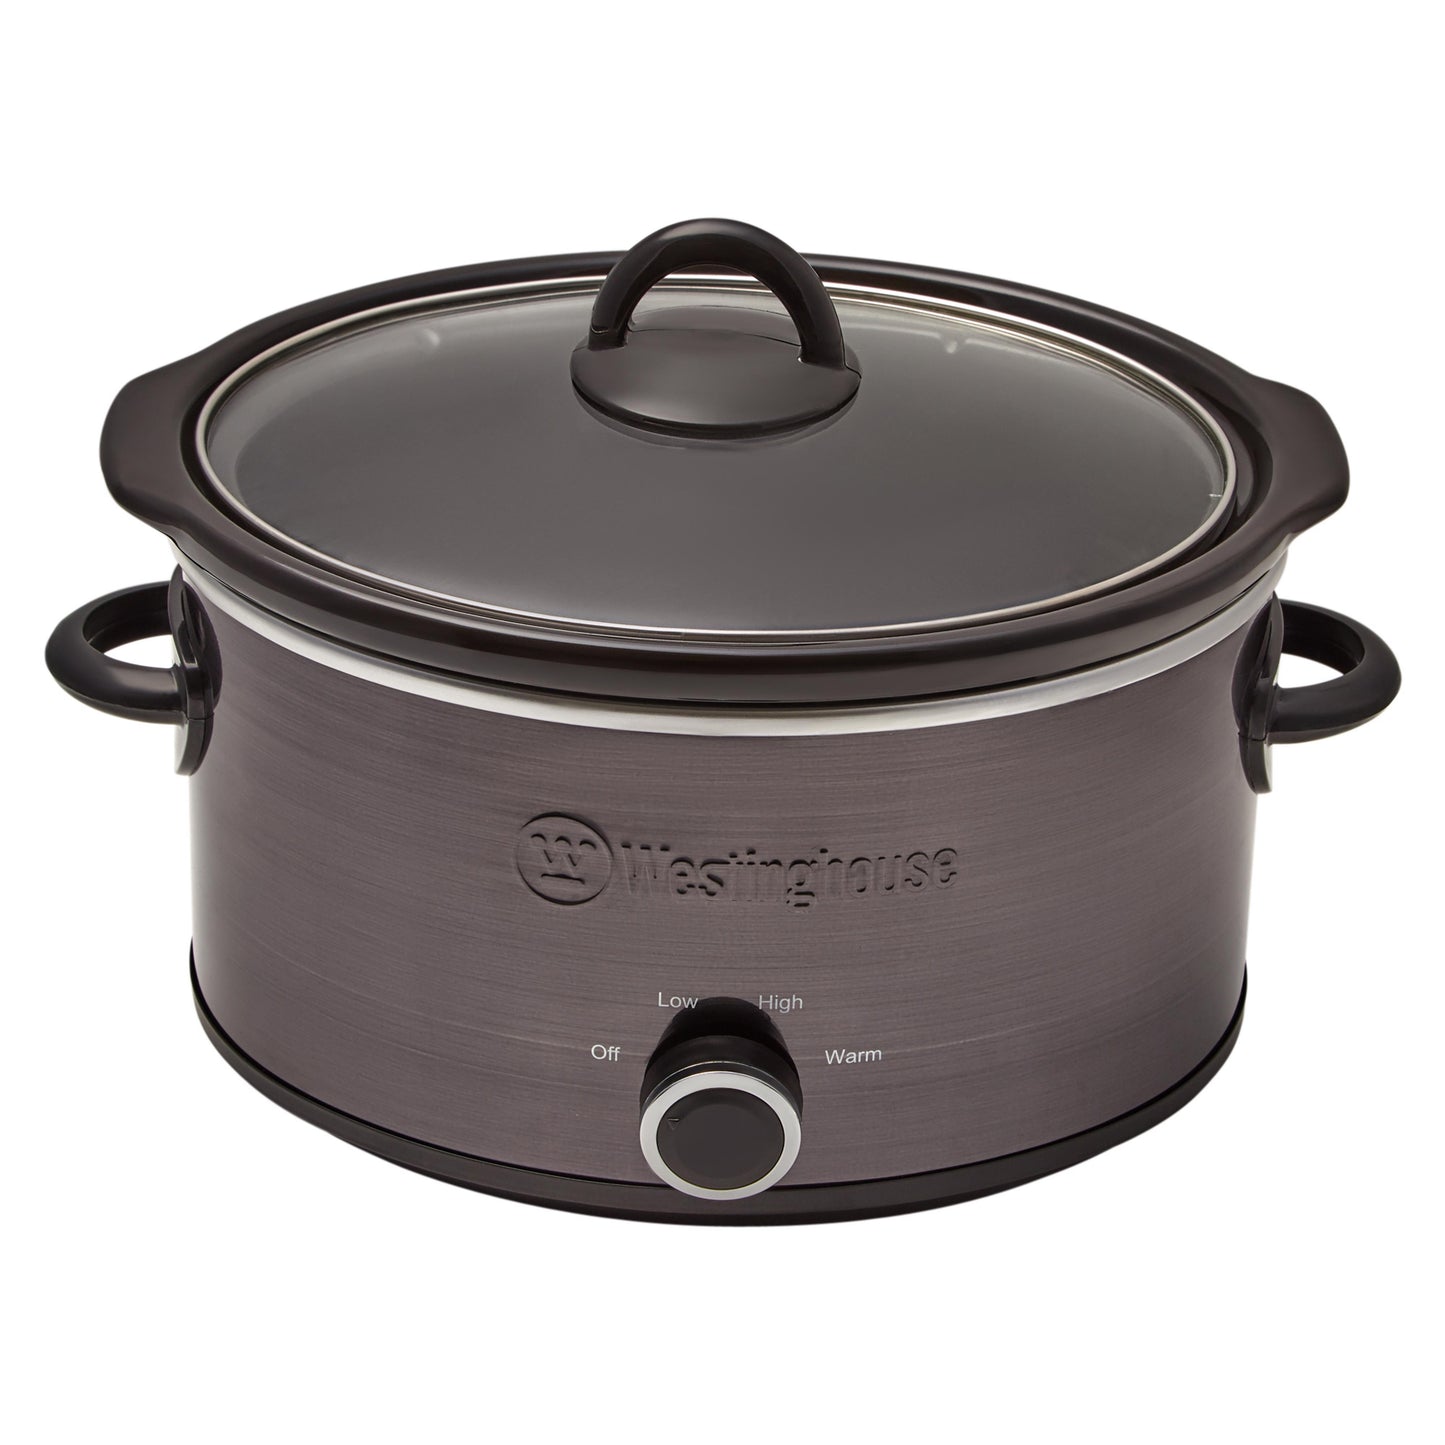 Westinghouse Slow Cooker 3.5L Black Stainless Steel